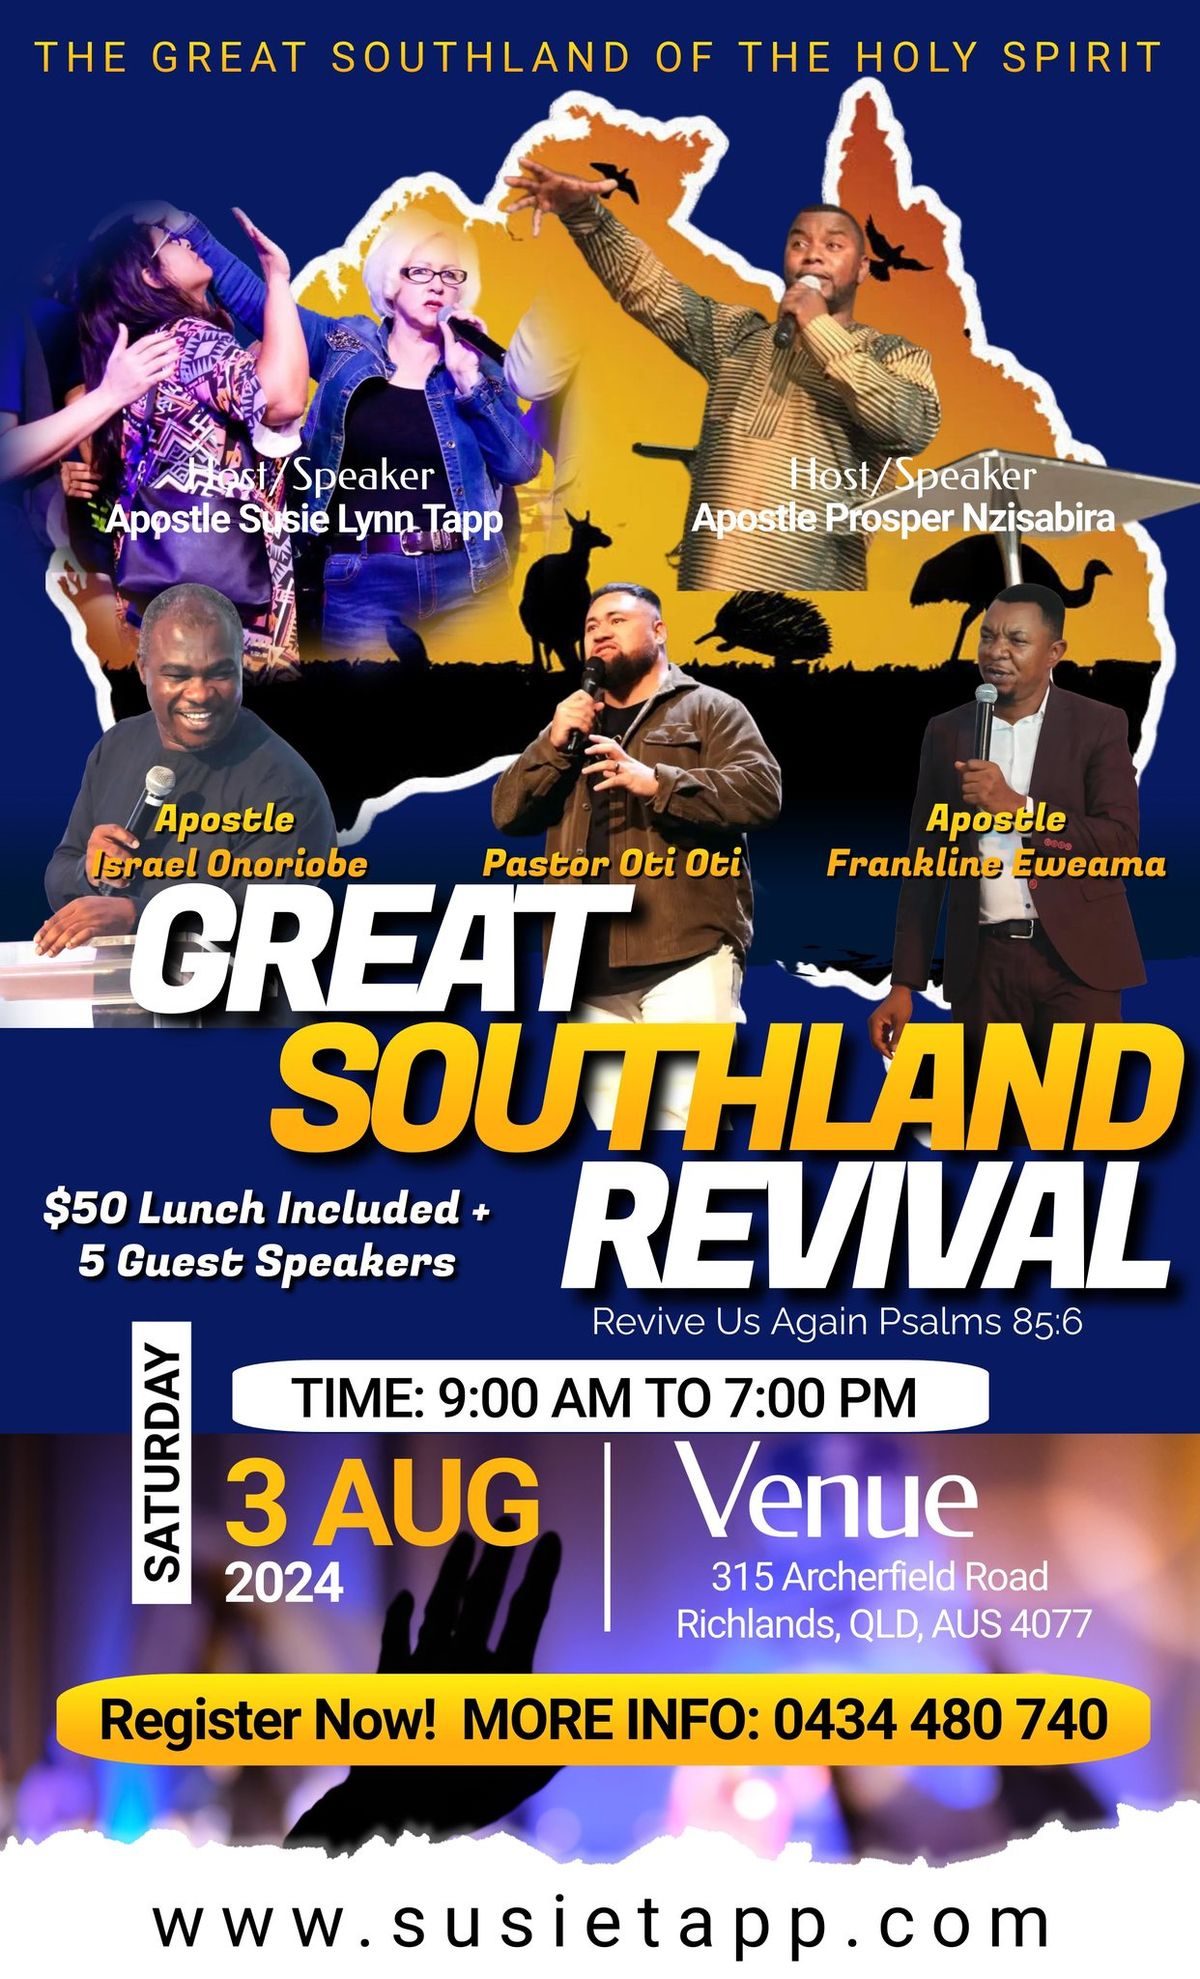 Great Southland Revival 